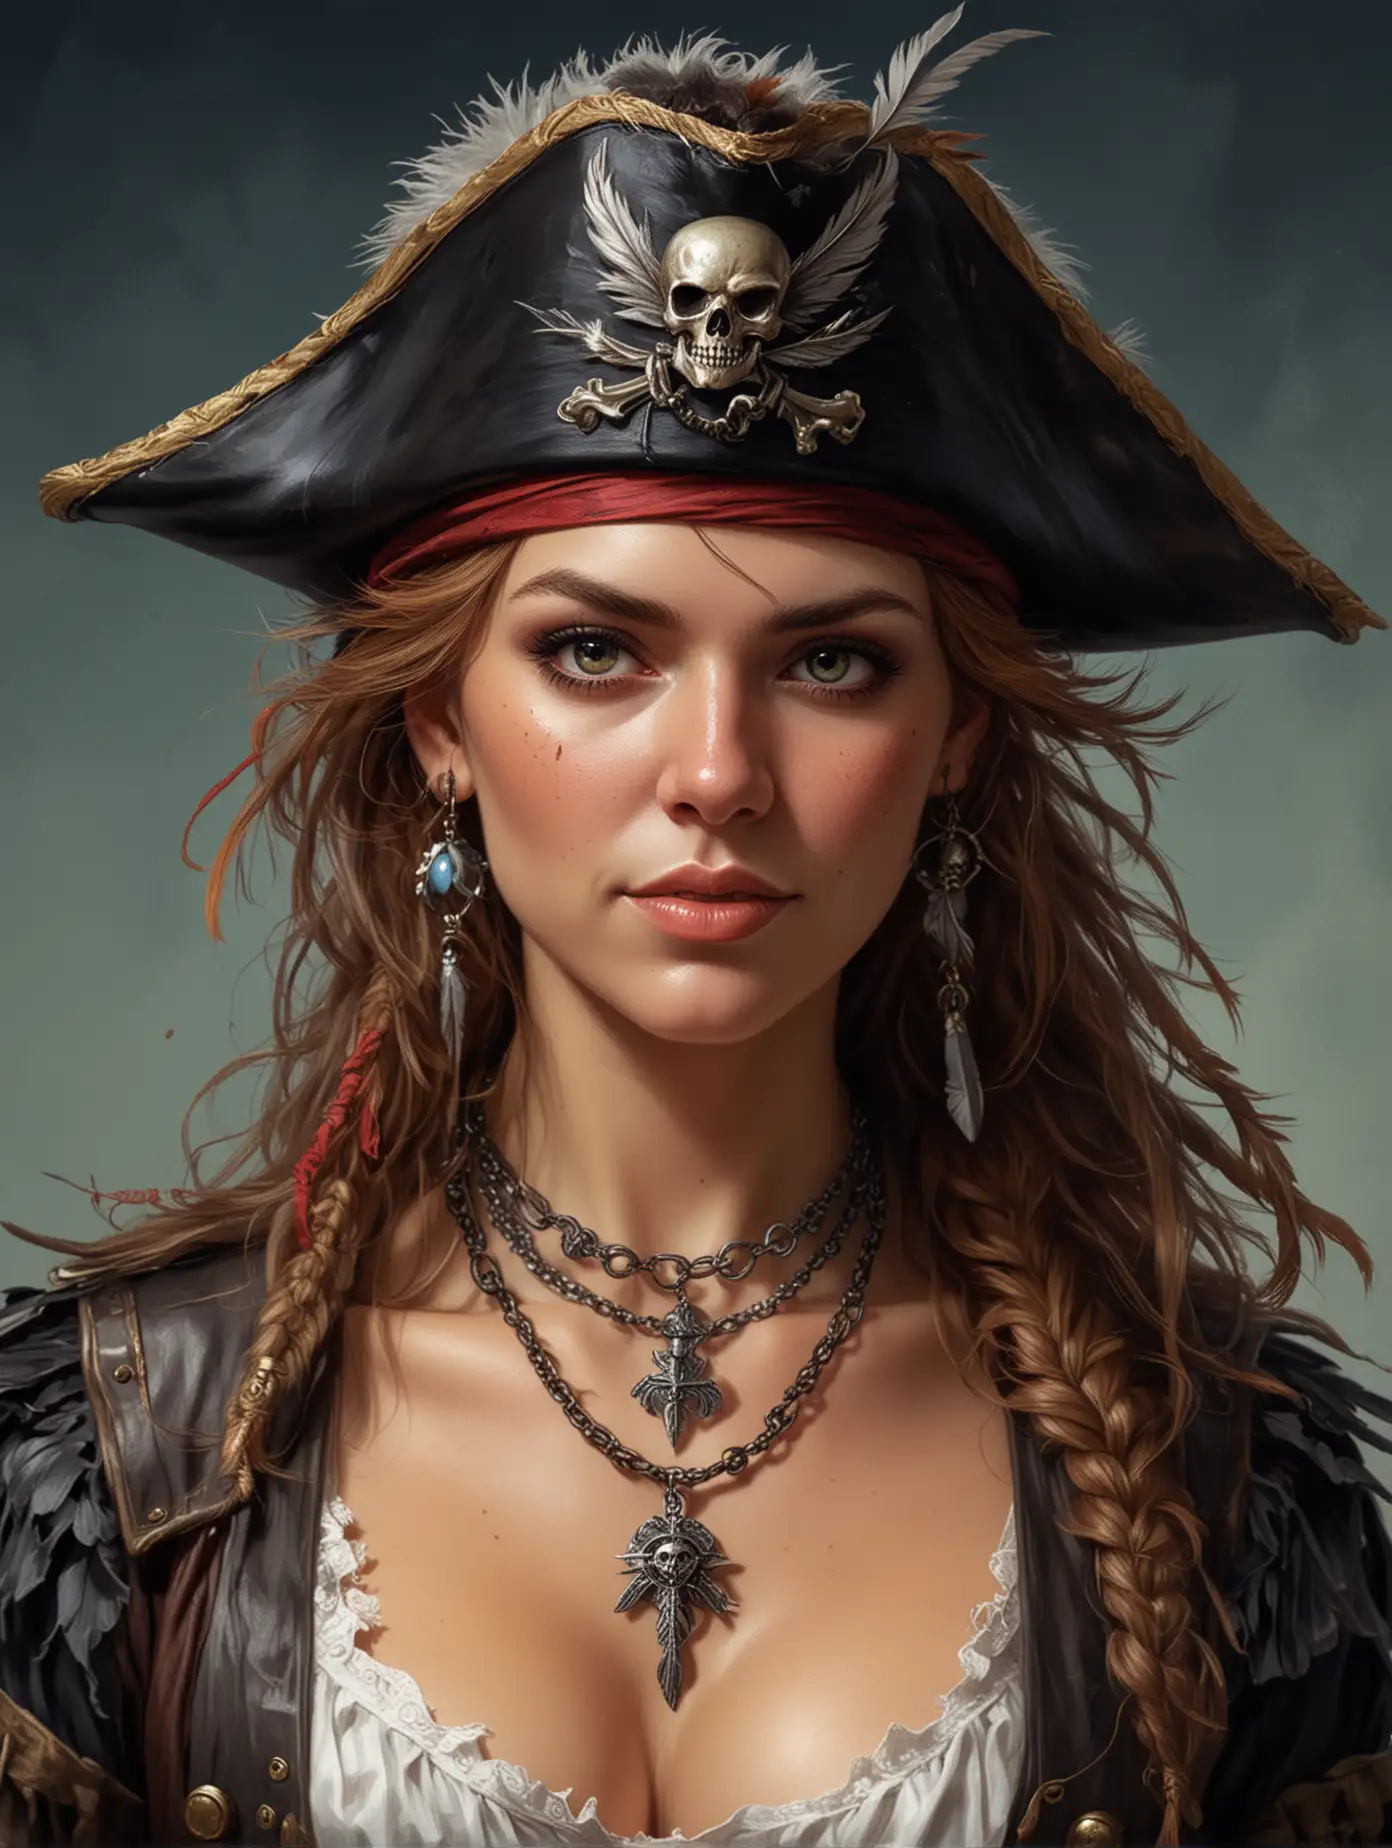 Detailed-Portrait-of-a-Female-Pirate-Captain-with-Feather-Hat-and-Necklace